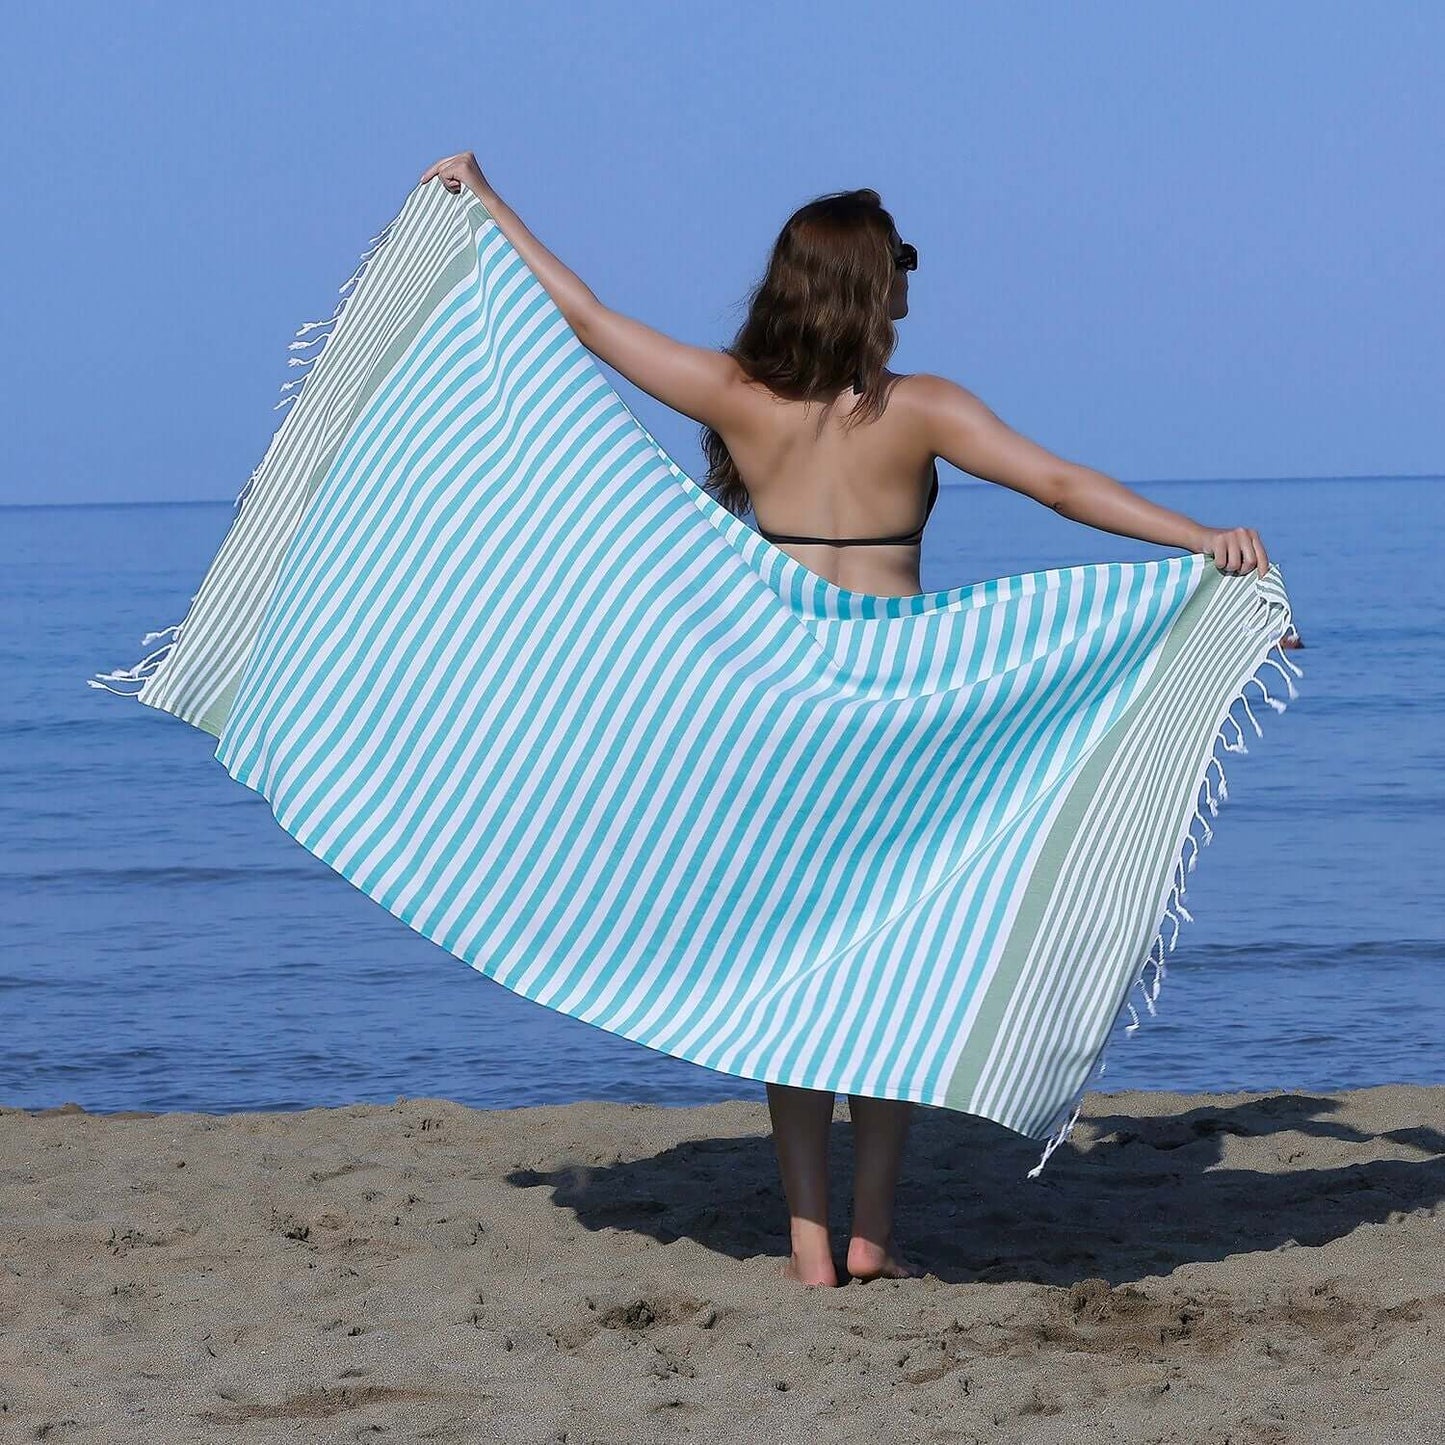  Woman at the beach showcasing a Loom Legacy turquoise and green striped beach towel with tassels, with the sea in the background.